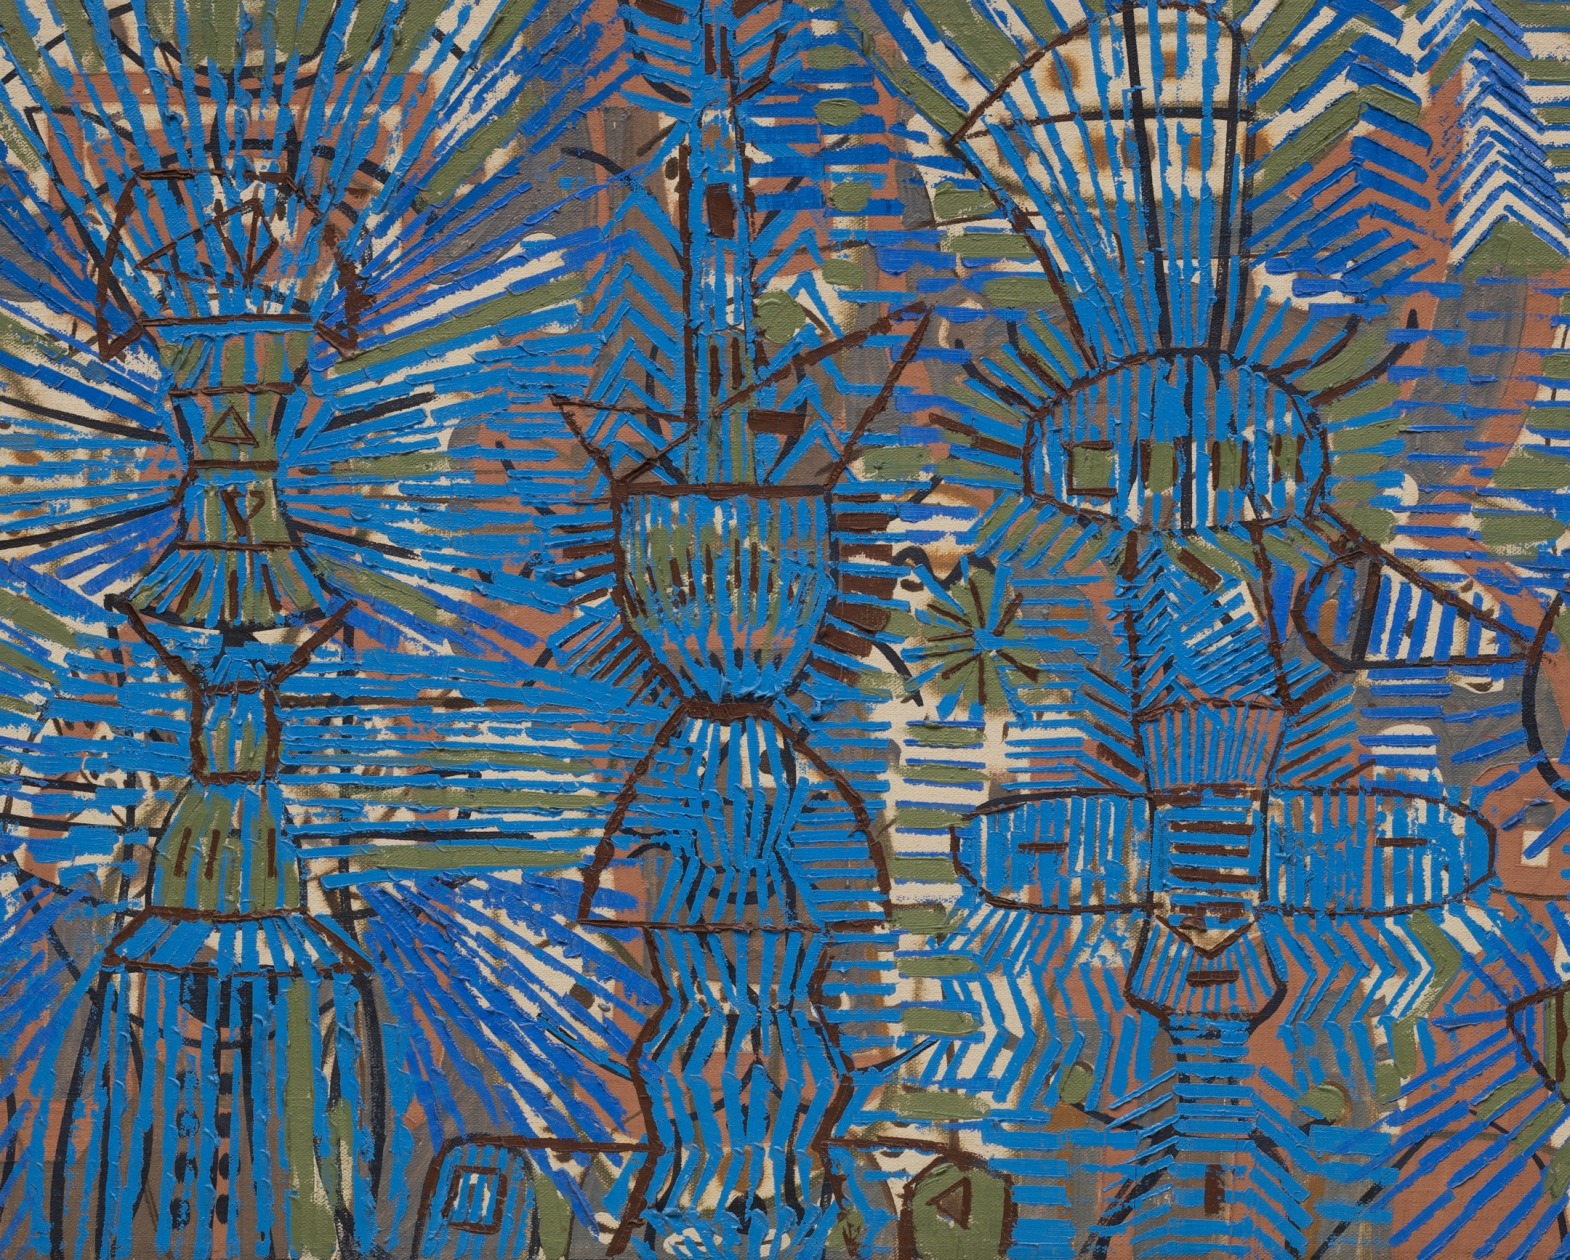 detail of Lee Mullican abstracted oil on canvas painting